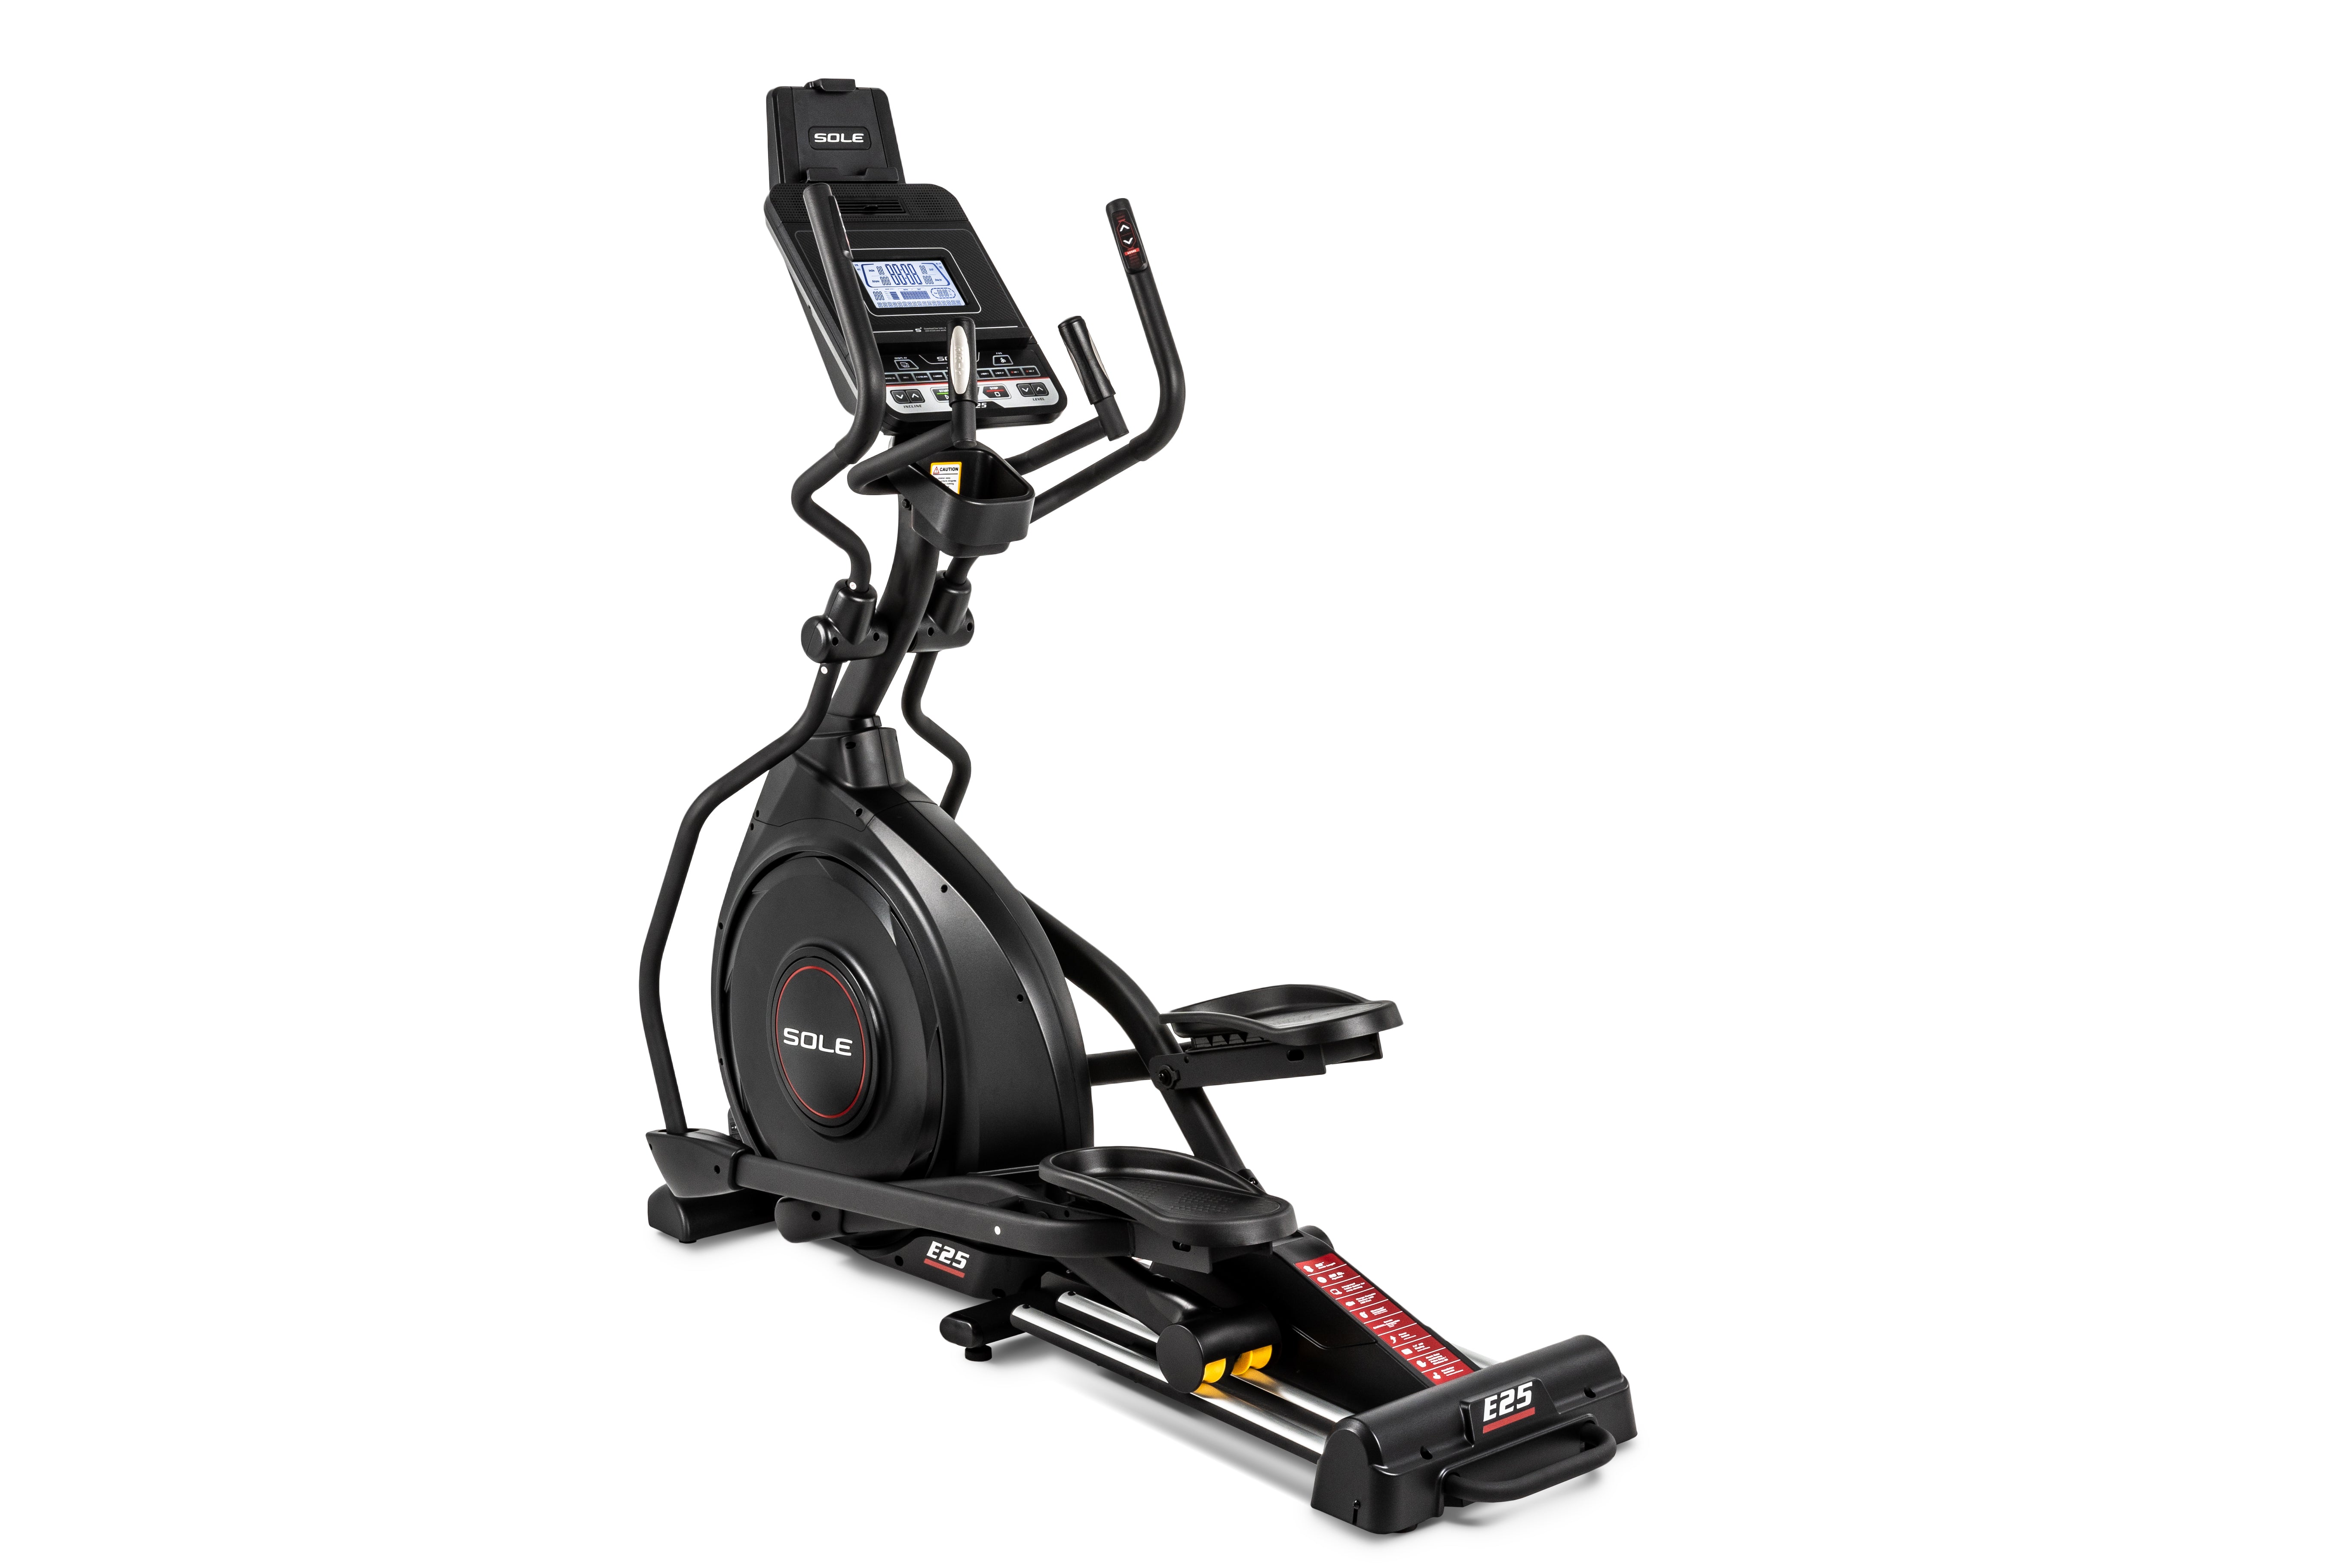 Sole E25 elliptical machine viewed from a front angle, showcasing its digital screen interface, ergonomic handlebars, branded wheel design, and foot pedals, all against a white background.